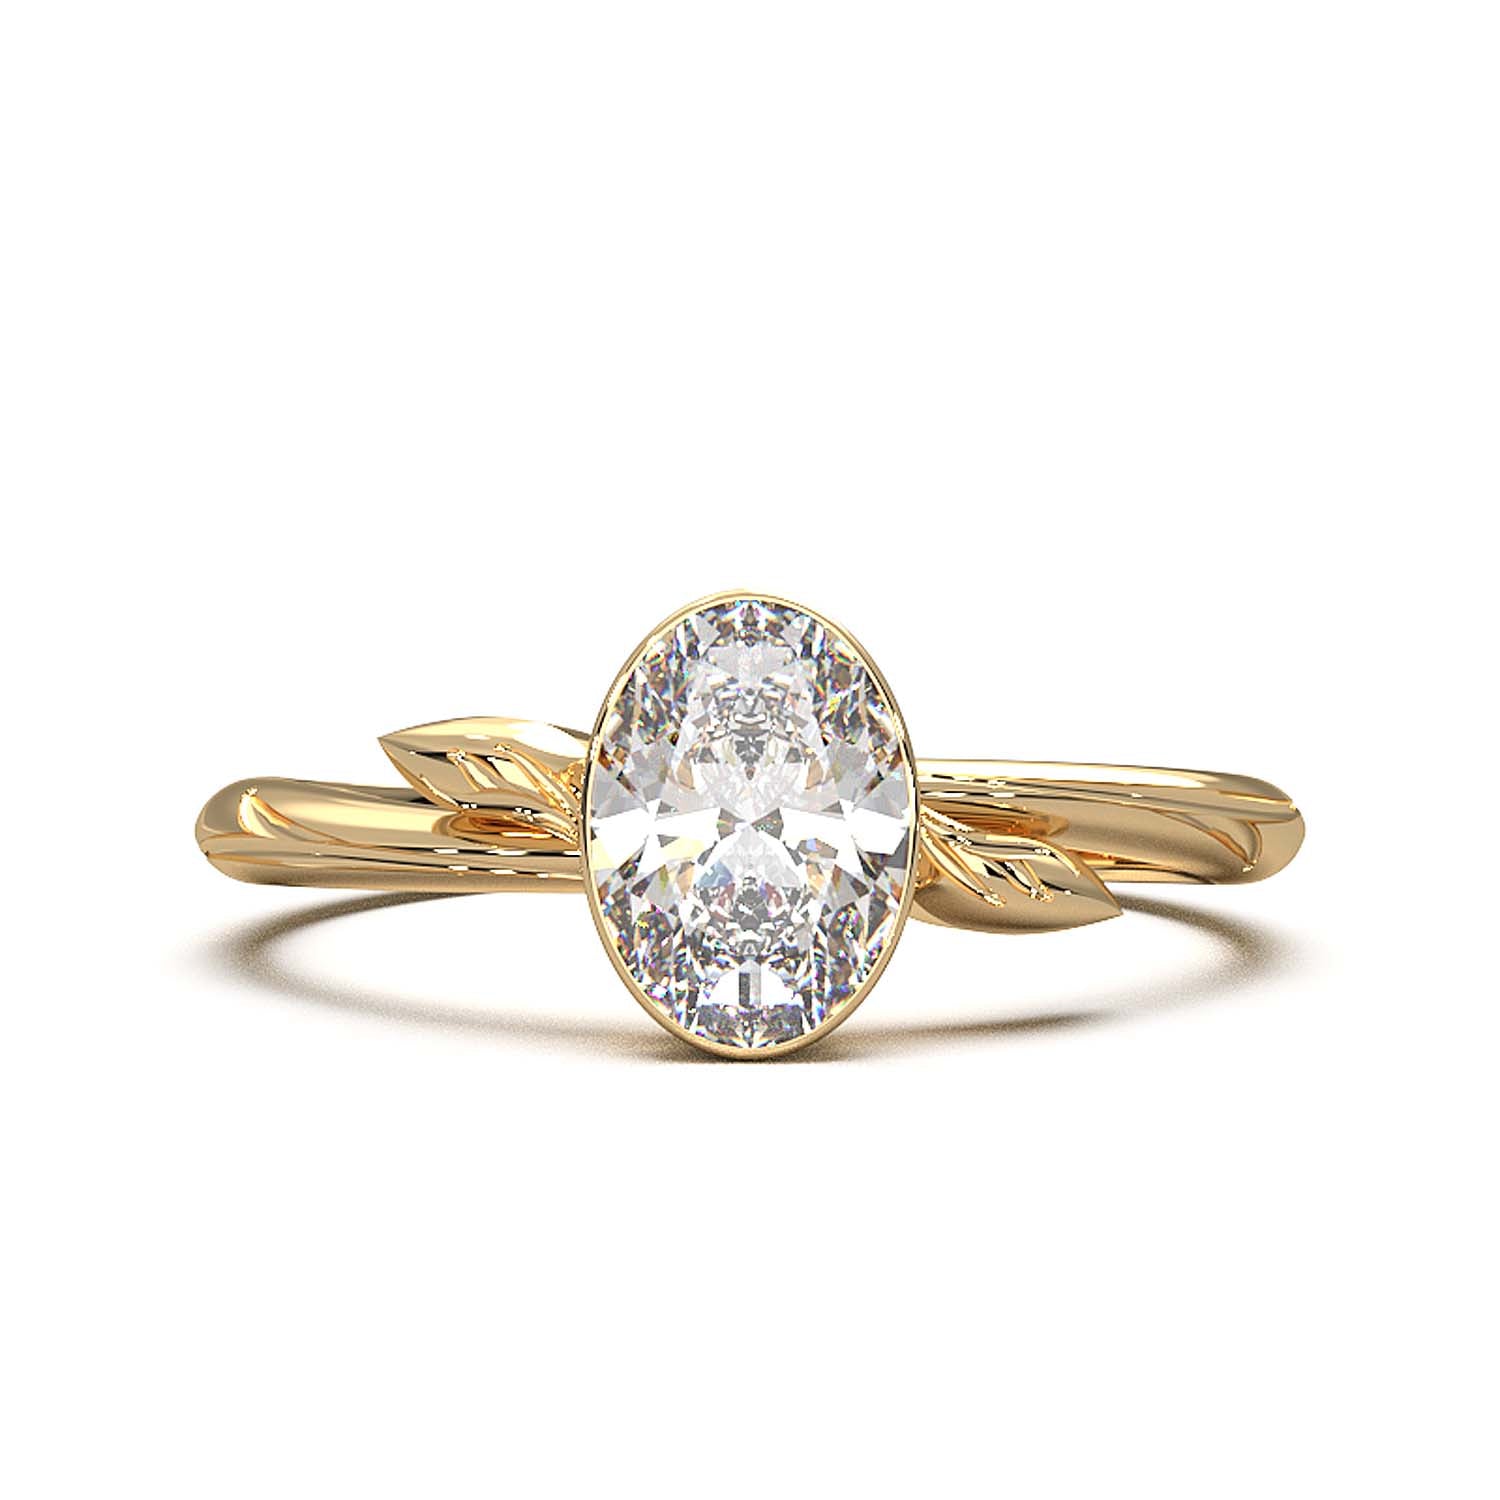 Exquisite Oval-Cut Lab Diamond Bezel Set Ring with Botanical-Inspired Gold Band - A Mesmerizing Marriage of Vintage Elegance and Modern Artistry Ideal for Timeless Romance